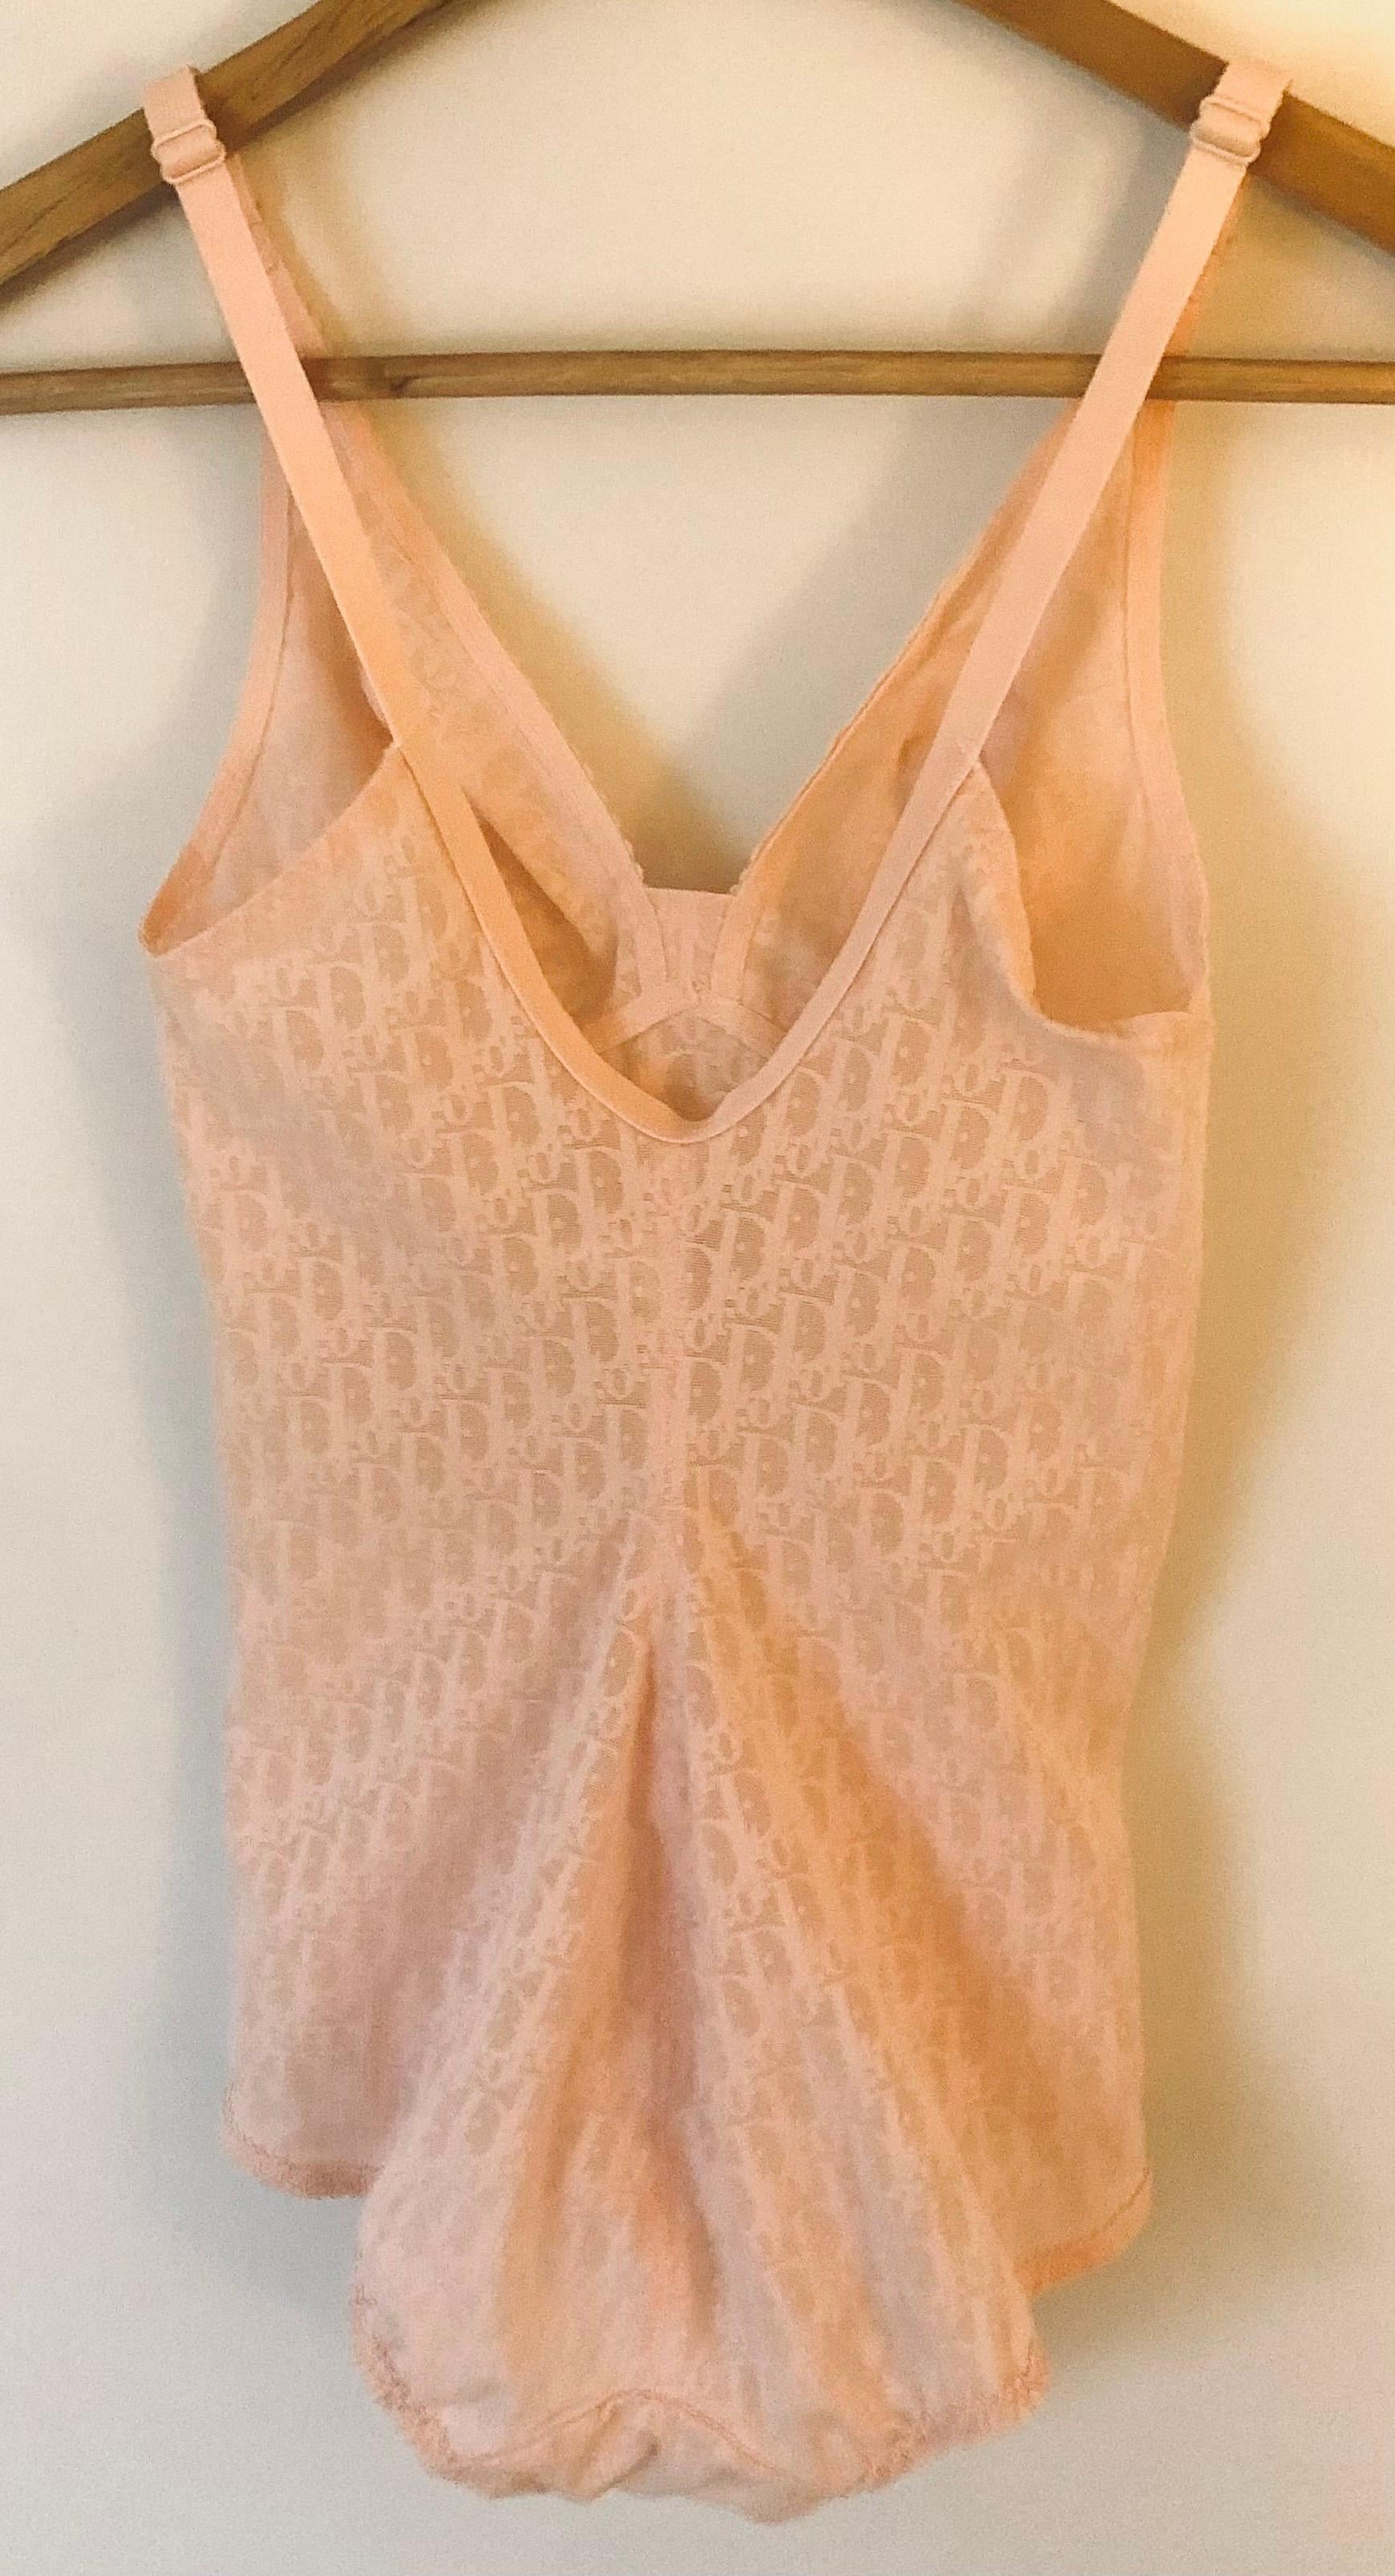 Vintage Christian Dior bodysuit in sheer pink/nude color featuring iconic logos.